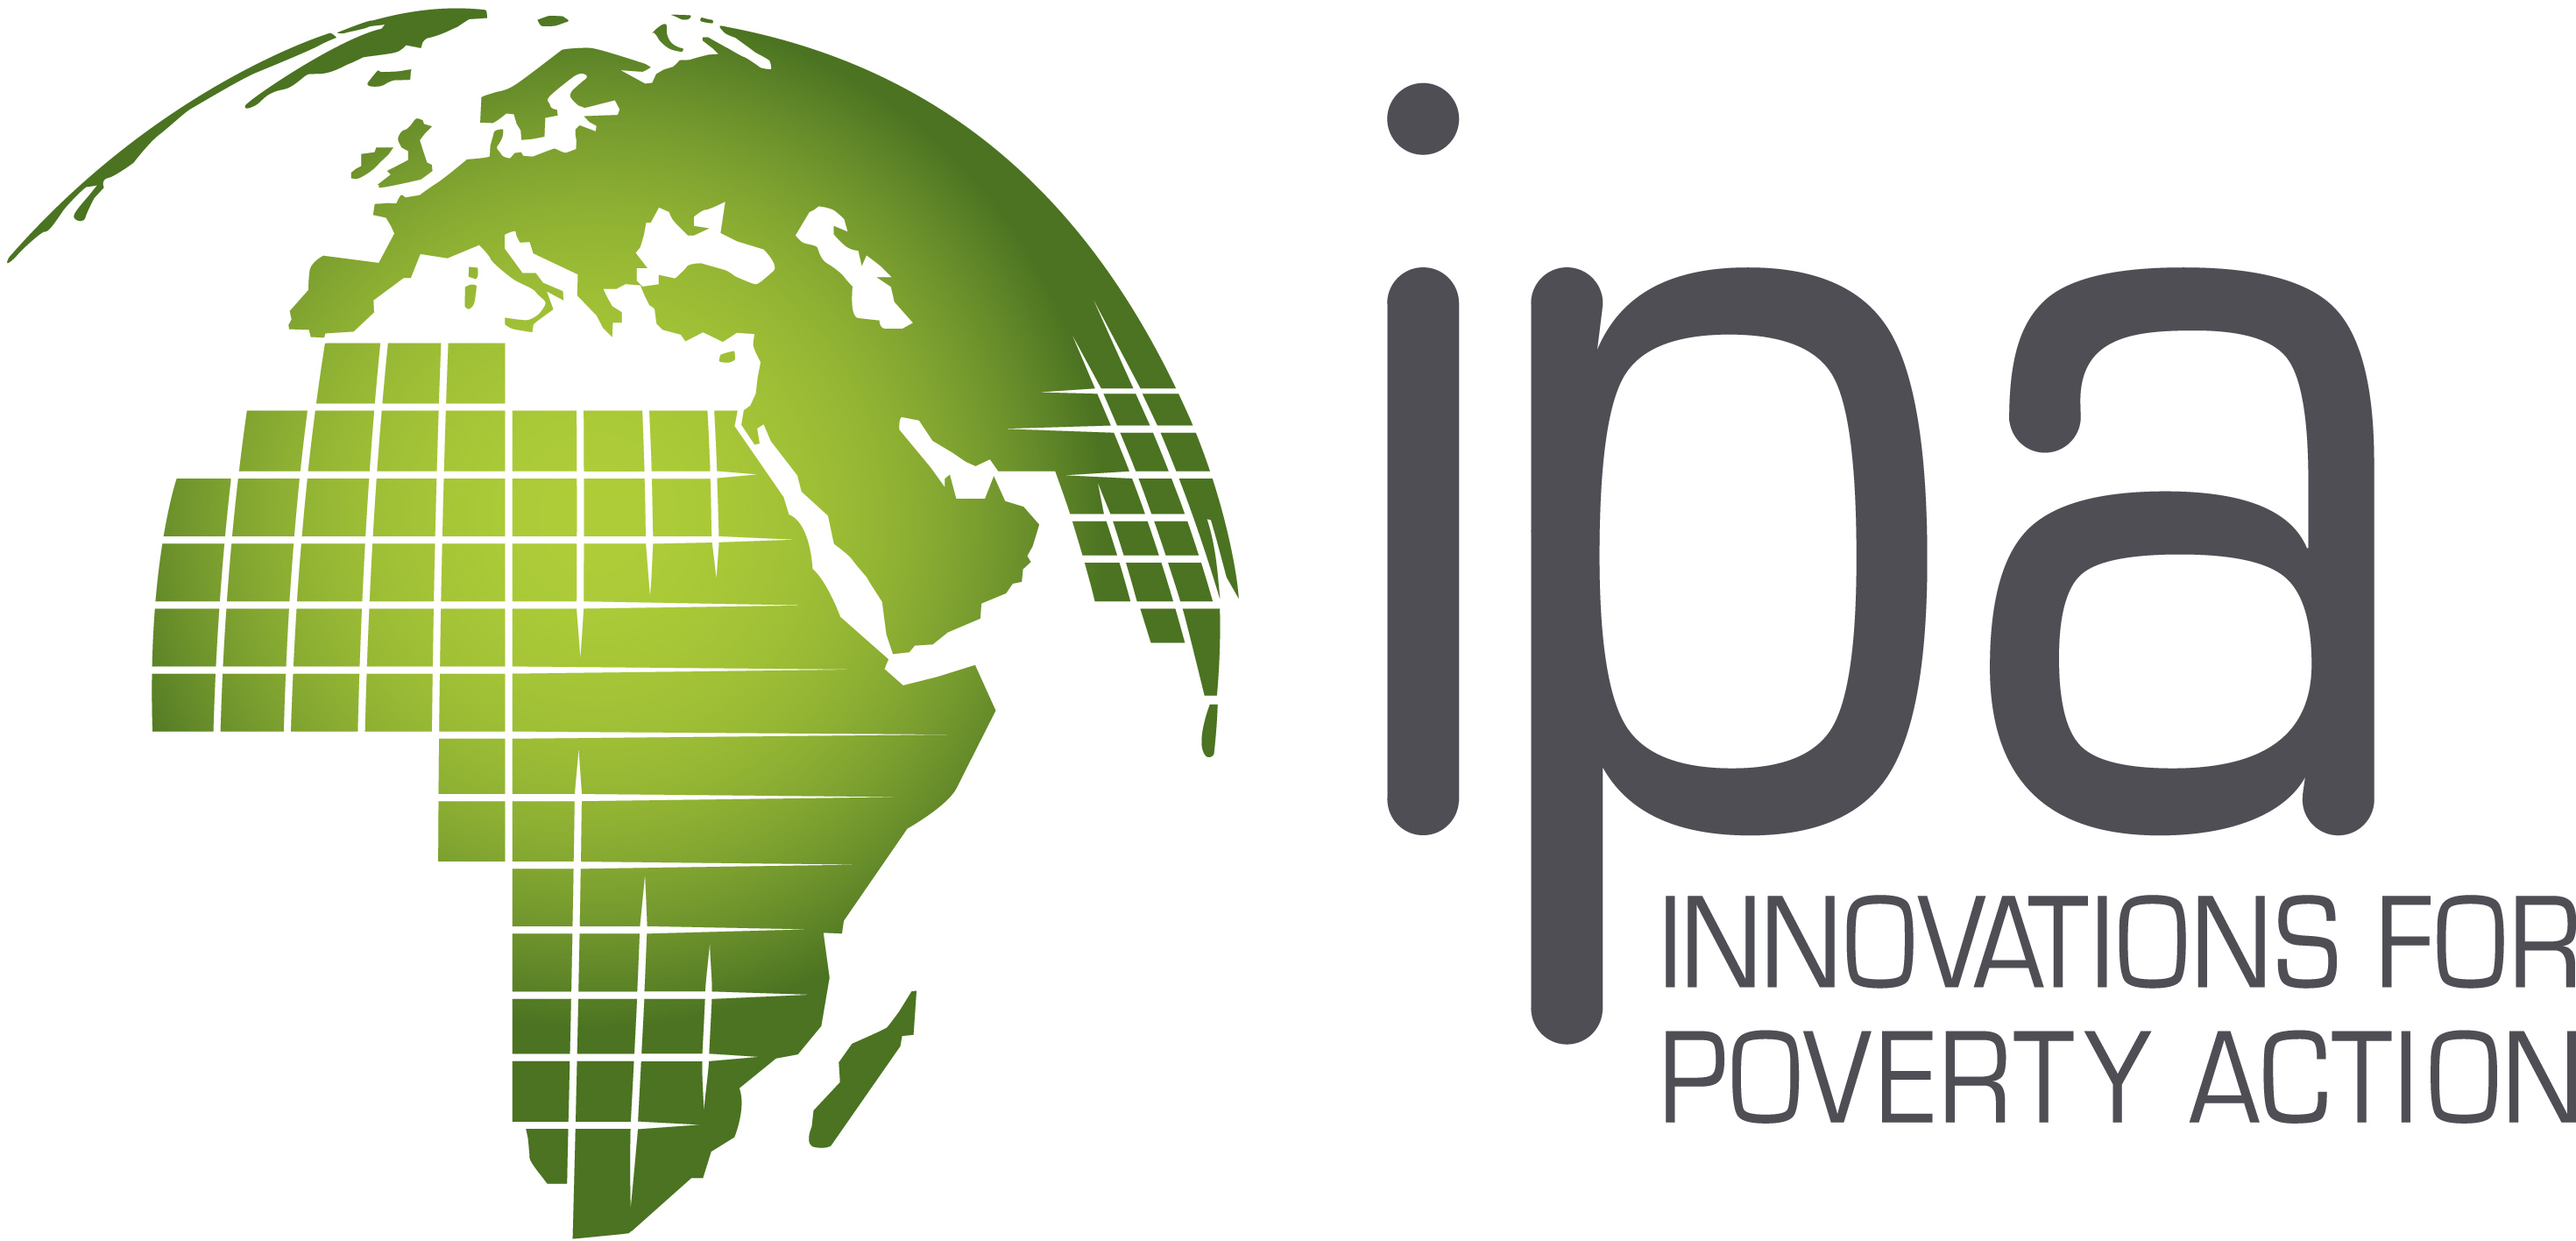 Innovations for Poverty Action (IPA) | The Abdul Latif Jameel Poverty